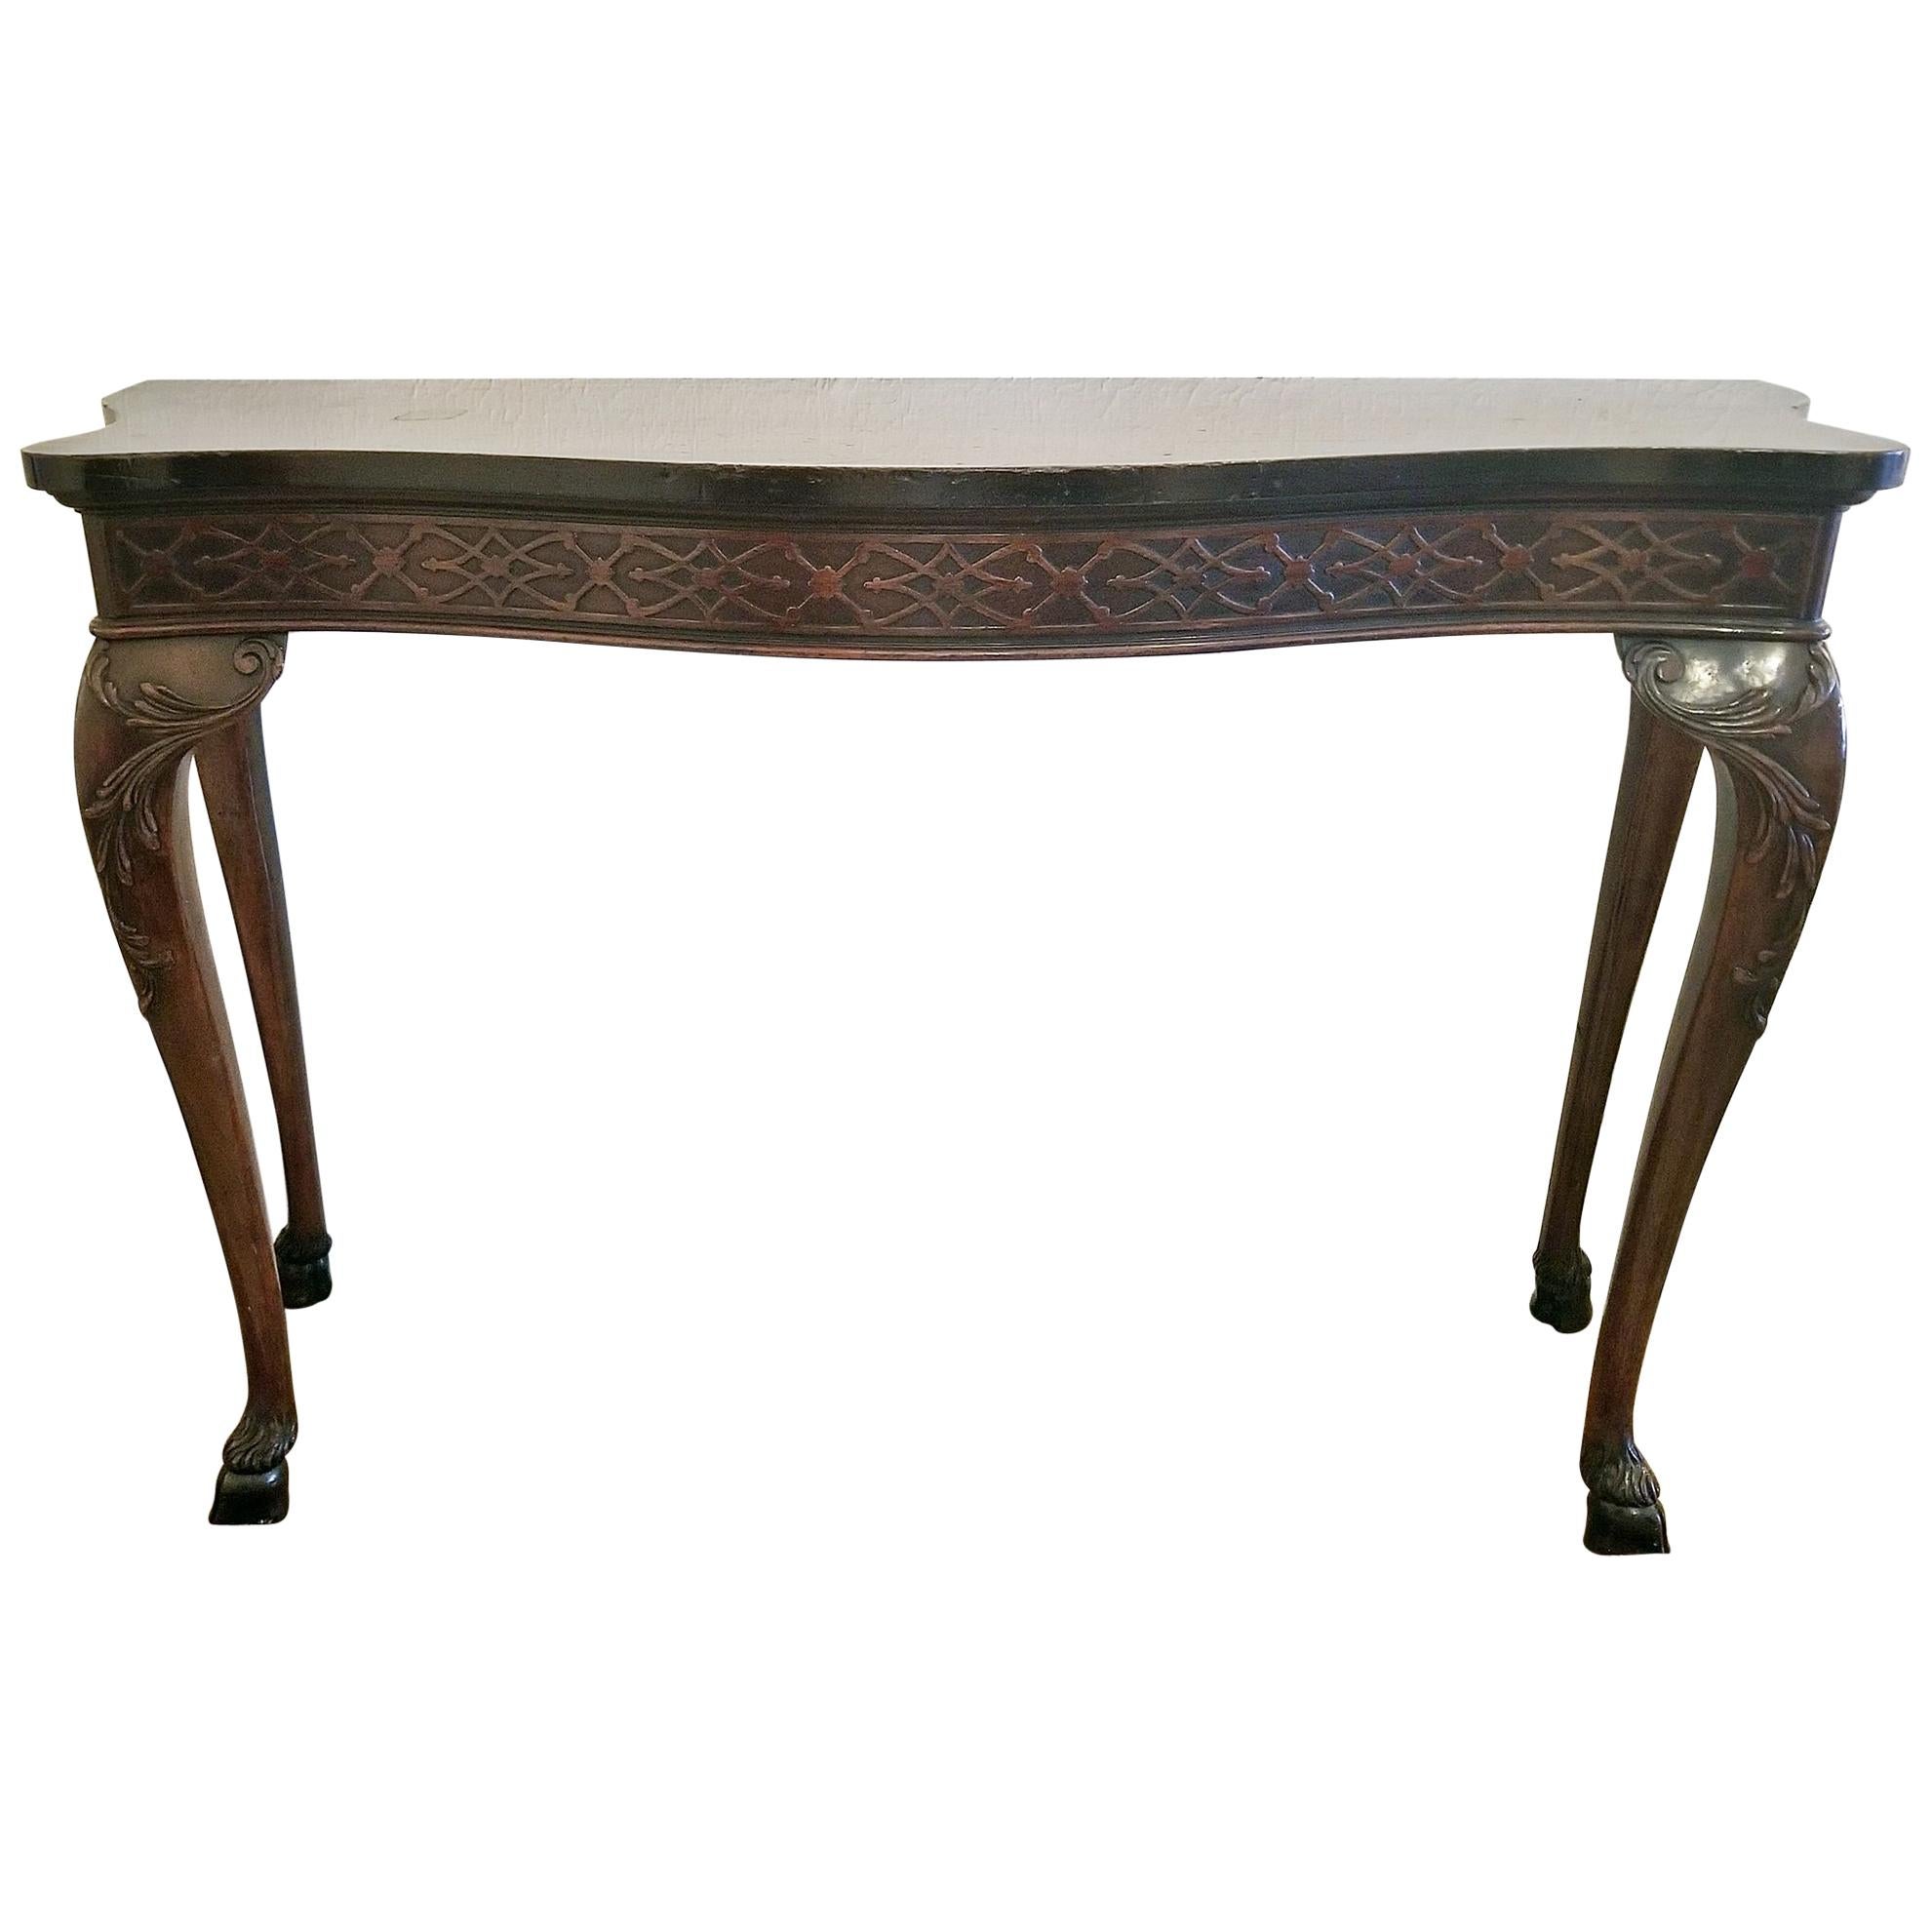 Chippendale Style Console Table with Hoof Feet